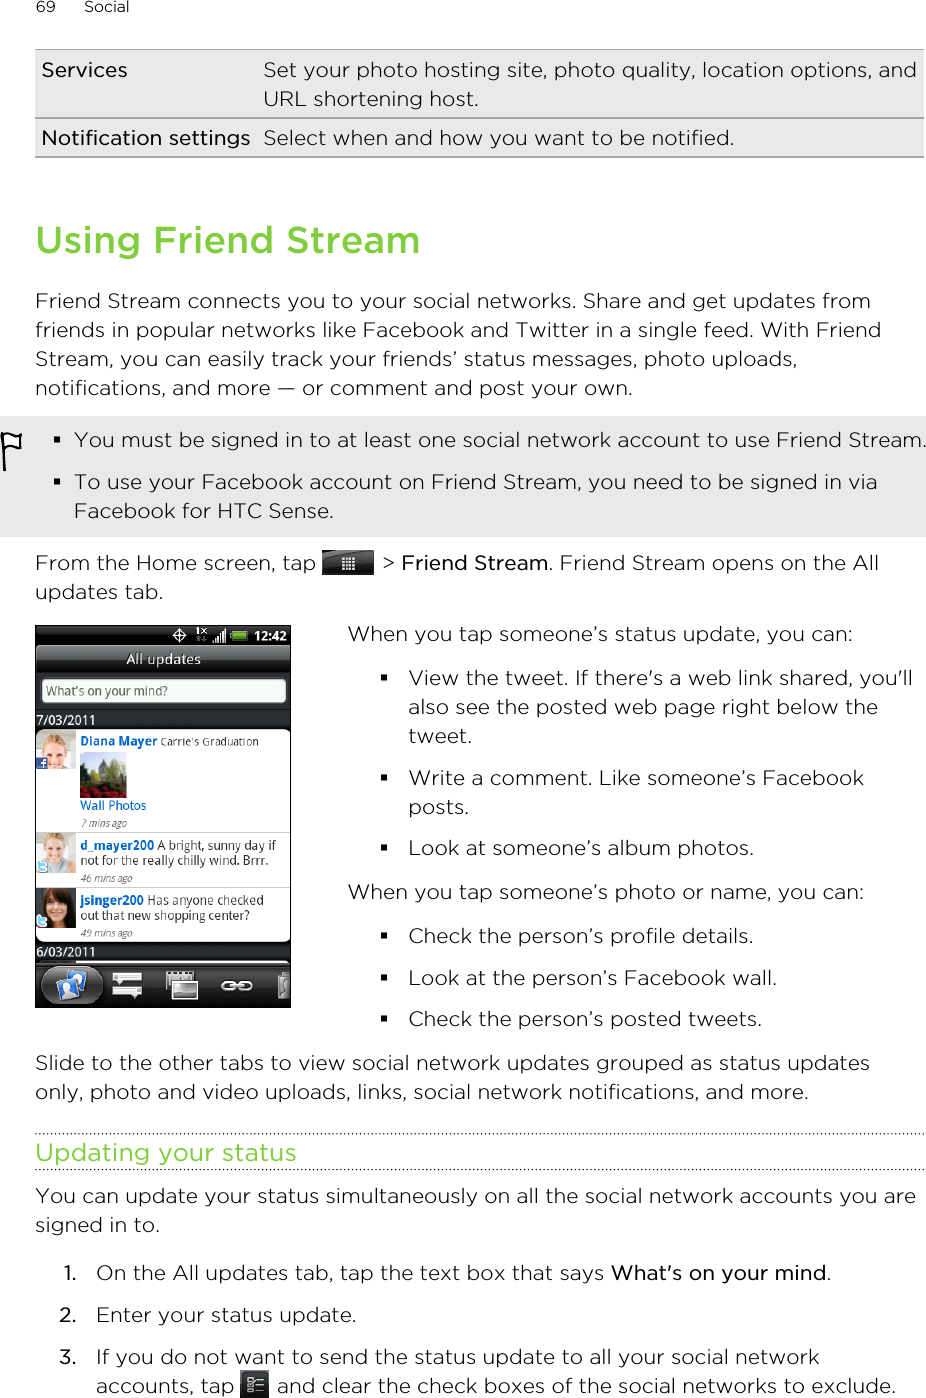 Services Set your photo hosting site, photo quality, location options, andURL shortening host.Notification settings Select when and how you want to be notified.Using Friend StreamFriend Stream connects you to your social networks. Share and get updates fromfriends in popular networks like Facebook and Twitter in a single feed. With FriendStream, you can easily track your friends’ status messages, photo uploads,notifications, and more — or comment and post your own.§You must be signed in to at least one social network account to use Friend Stream.§To use your Facebook account on Friend Stream, you need to be signed in viaFacebook for HTC Sense.From the Home screen, tap   &gt; Friend Stream. Friend Stream opens on the Allupdates tab.When you tap someone’s status update, you can:§View the tweet. If there&apos;s a web link shared, you&apos;llalso see the posted web page right below thetweet.§Write a comment. Like someone’s Facebookposts.§Look at someone’s album photos.When you tap someone’s photo or name, you can:§Check the person’s profile details.§Look at the person’s Facebook wall.§Check the person’s posted tweets.Slide to the other tabs to view social network updates grouped as status updatesonly, photo and video uploads, links, social network notifications, and more.Updating your statusYou can update your status simultaneously on all the social network accounts you aresigned in to.1. On the All updates tab, tap the text box that says What&apos;s on your mind.2. Enter your status update.3. If you do not want to send the status update to all your social networkaccounts, tap   and clear the check boxes of the social networks to exclude.69 Social